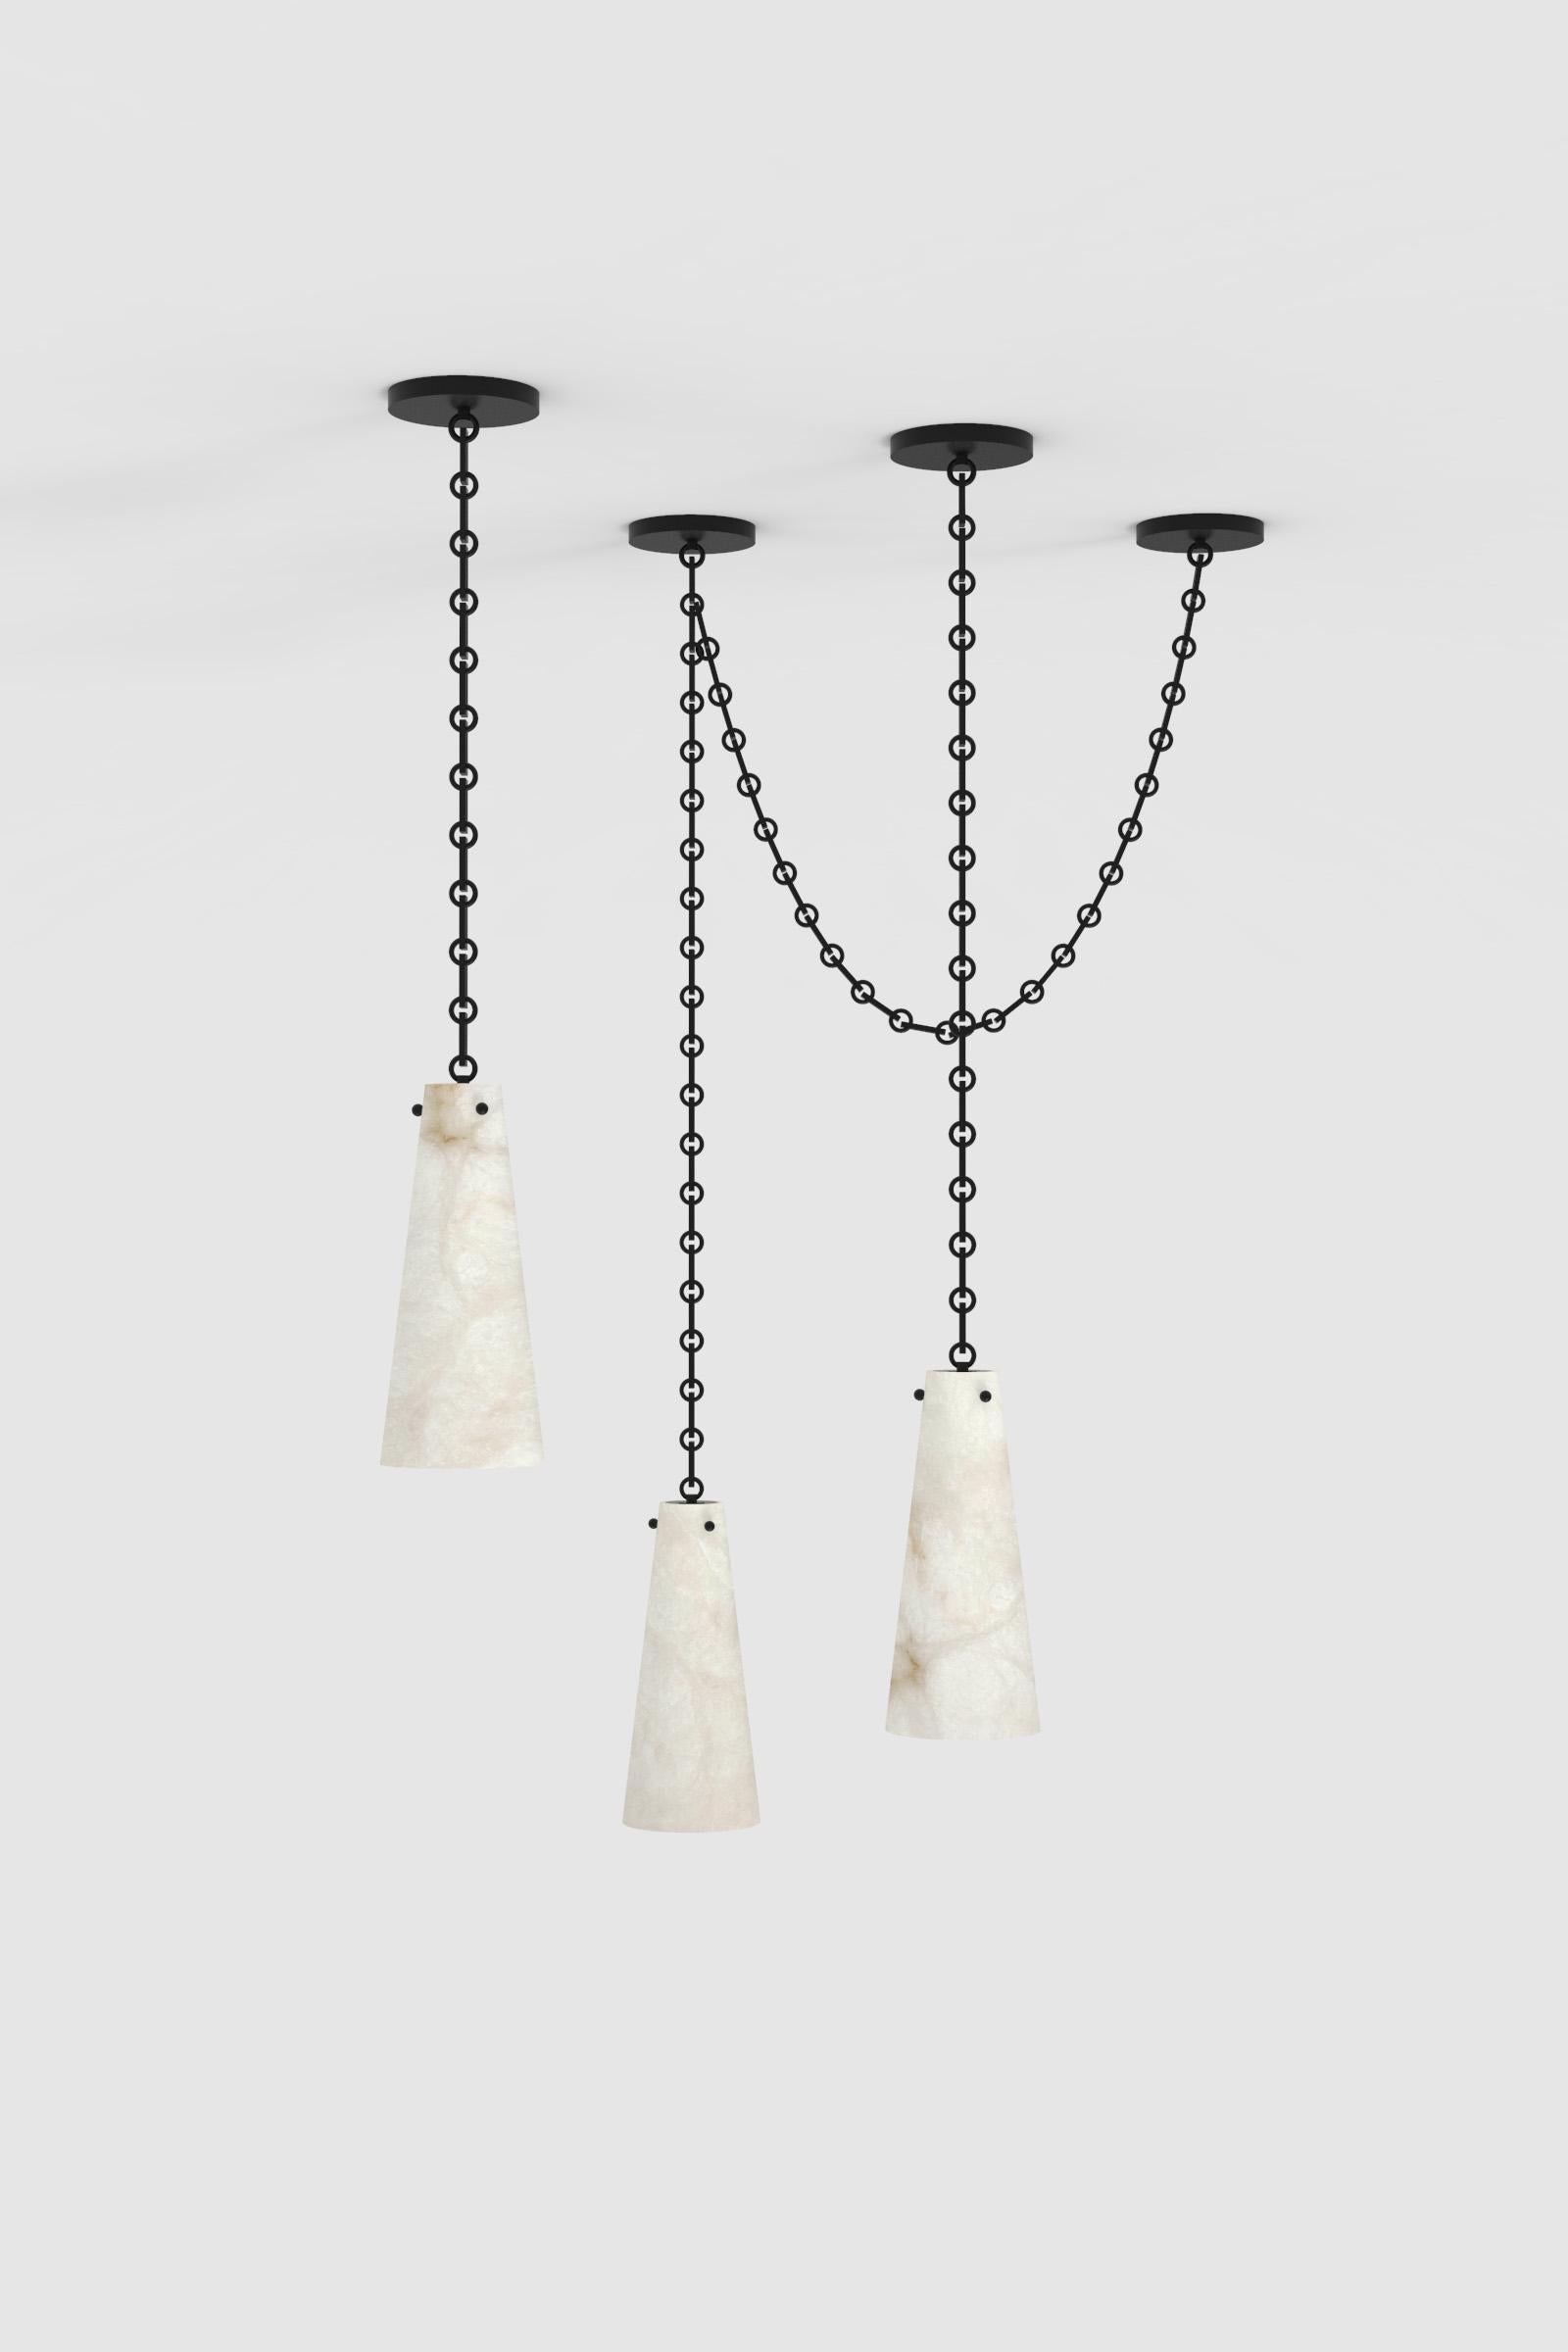 Orphan Work 202A Chandelier BLK, 2021
Shown in alabaster with blackened brass
Available in brushed brass and blackened brass
Measures: 15” H x 6 1/2” W
Height and width to order*
Canopy 6